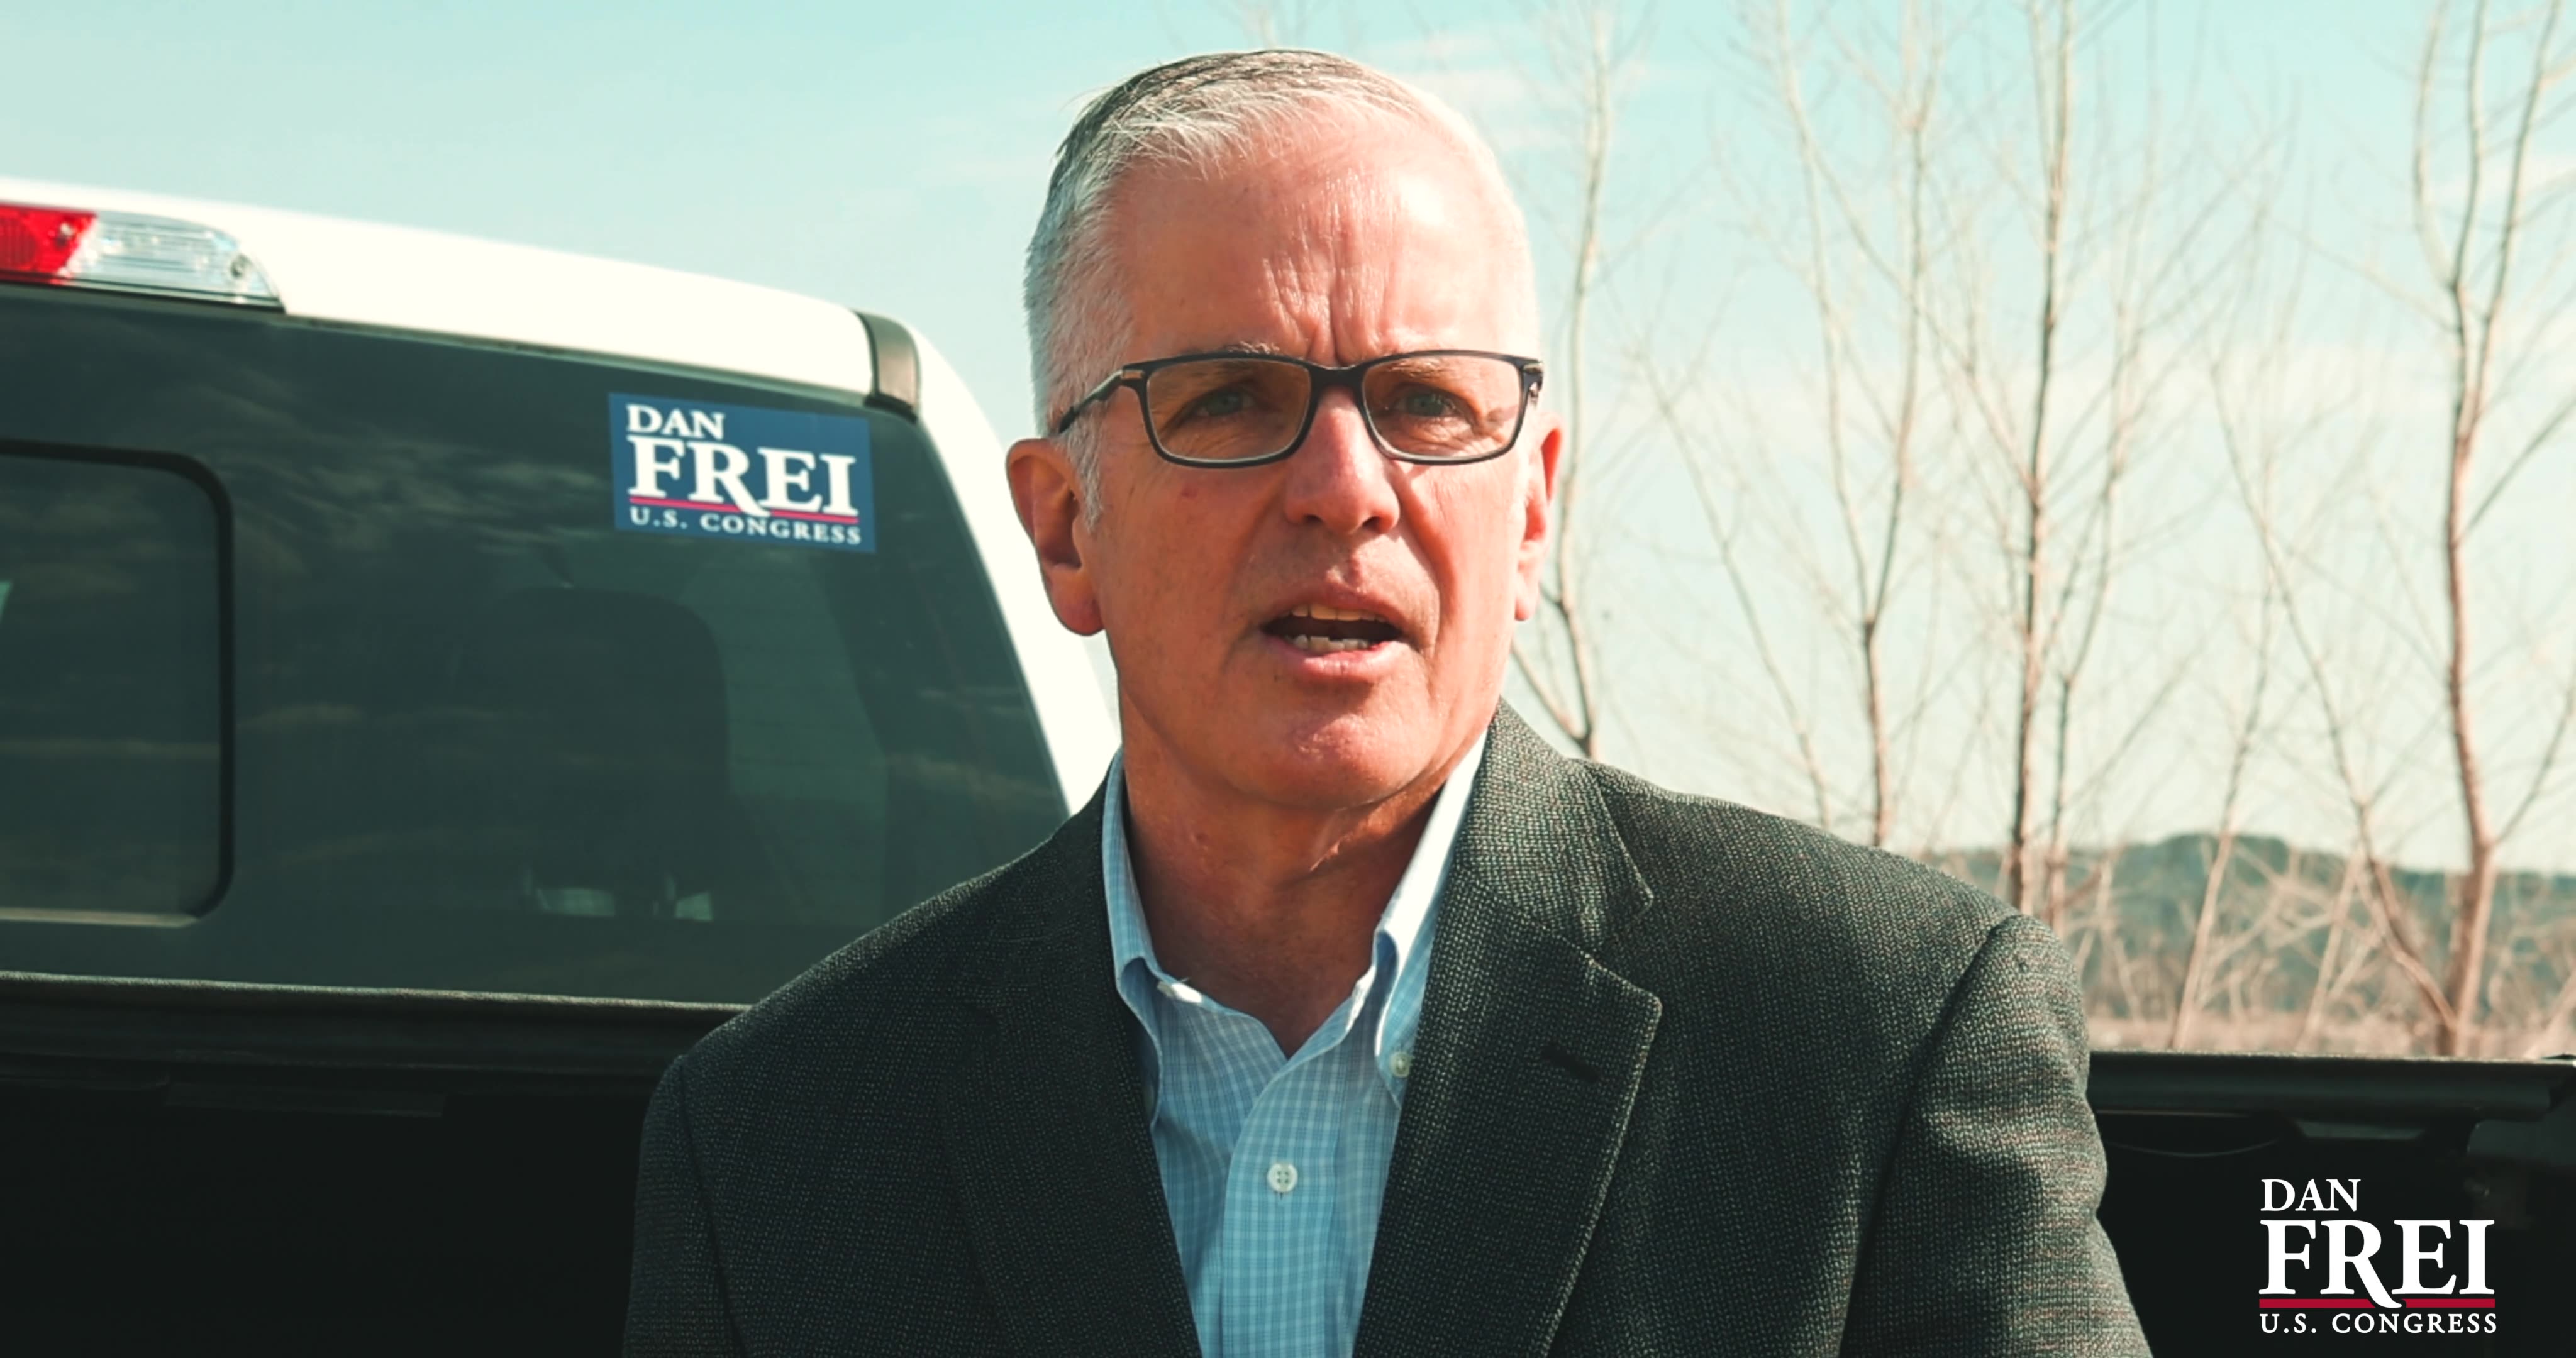 Championing Fiscal Responsibility | Dan Frei for Congress